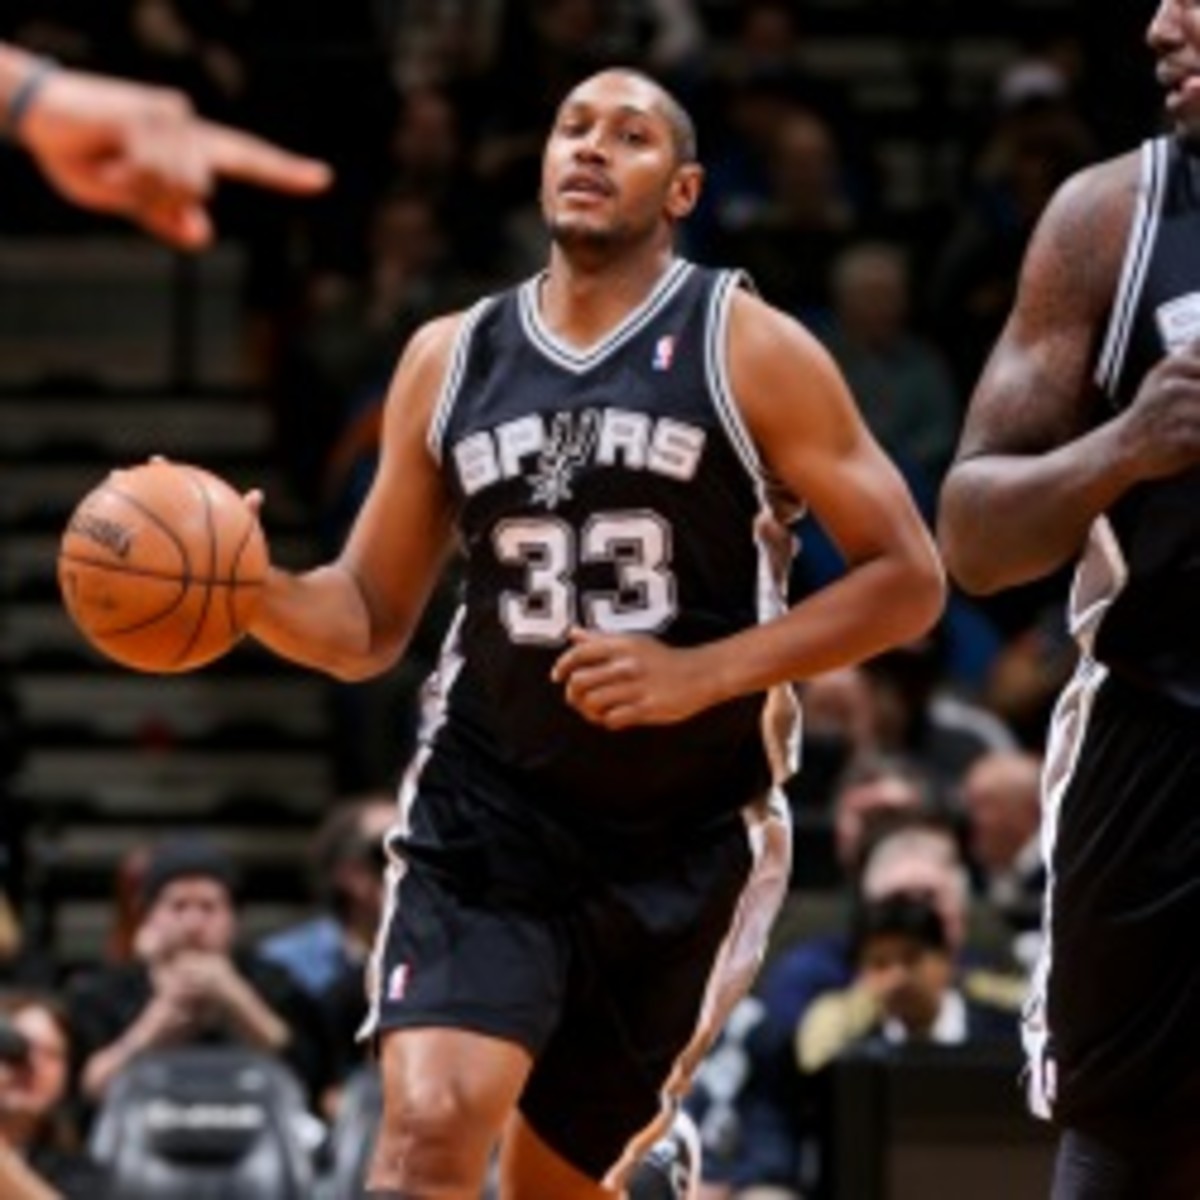 Spurs forward Boris Diaw will be out 2-3 weeks after surgery on his spine. (David Sherman/NBA/Getty Images)